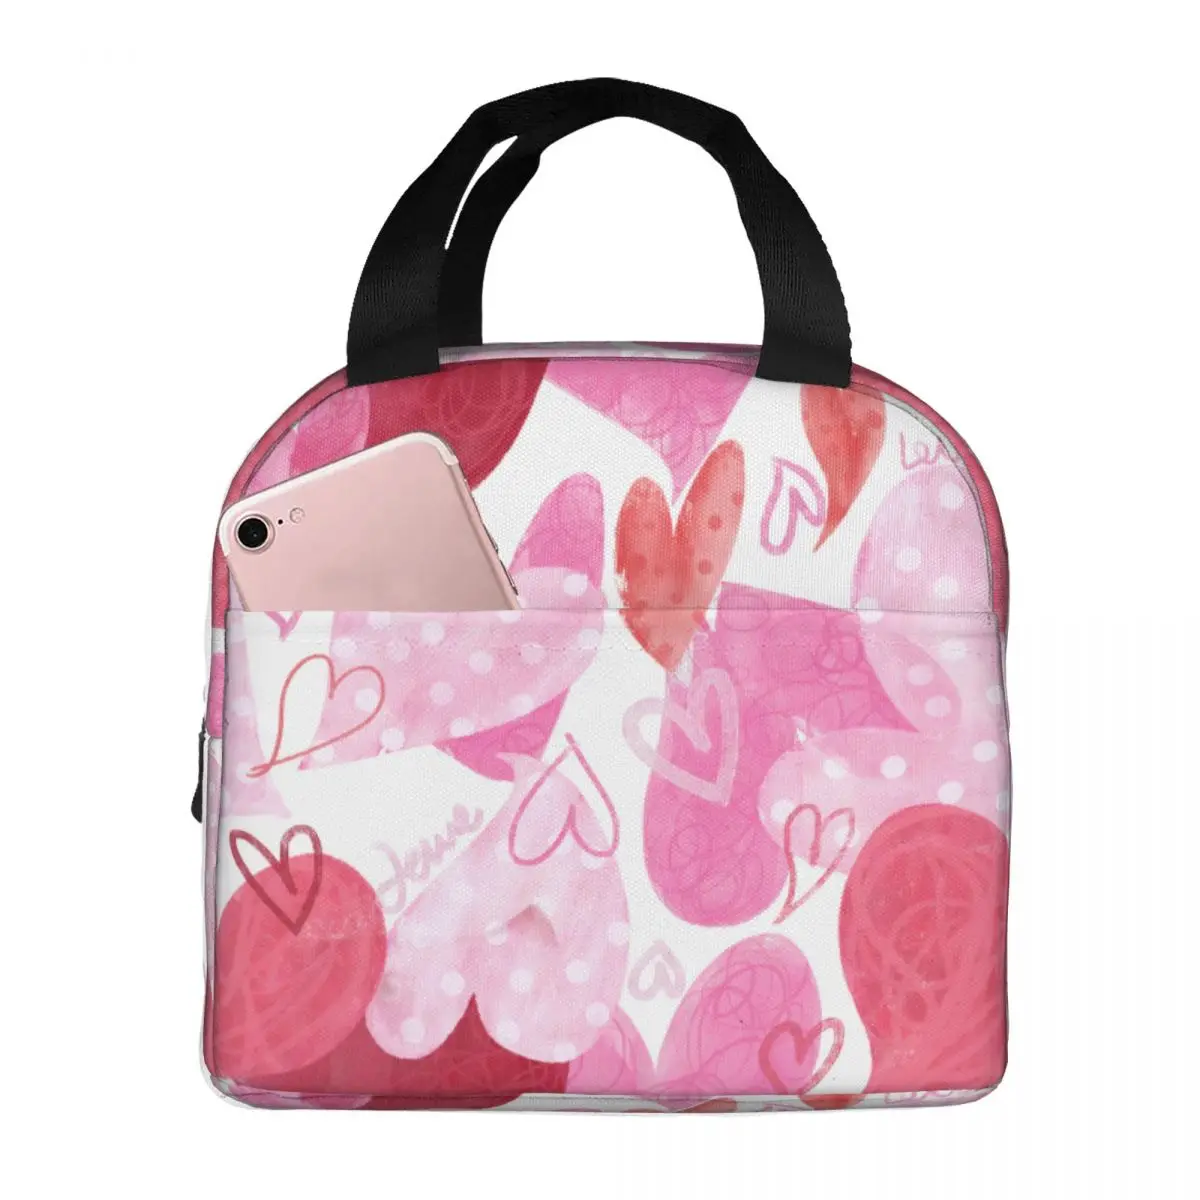 Watercolor Love Hearts Lunch Bag Portable Insulated Canvas Cooler Bags Thermal Cold Food Picnic Travel Lunch Box for Women